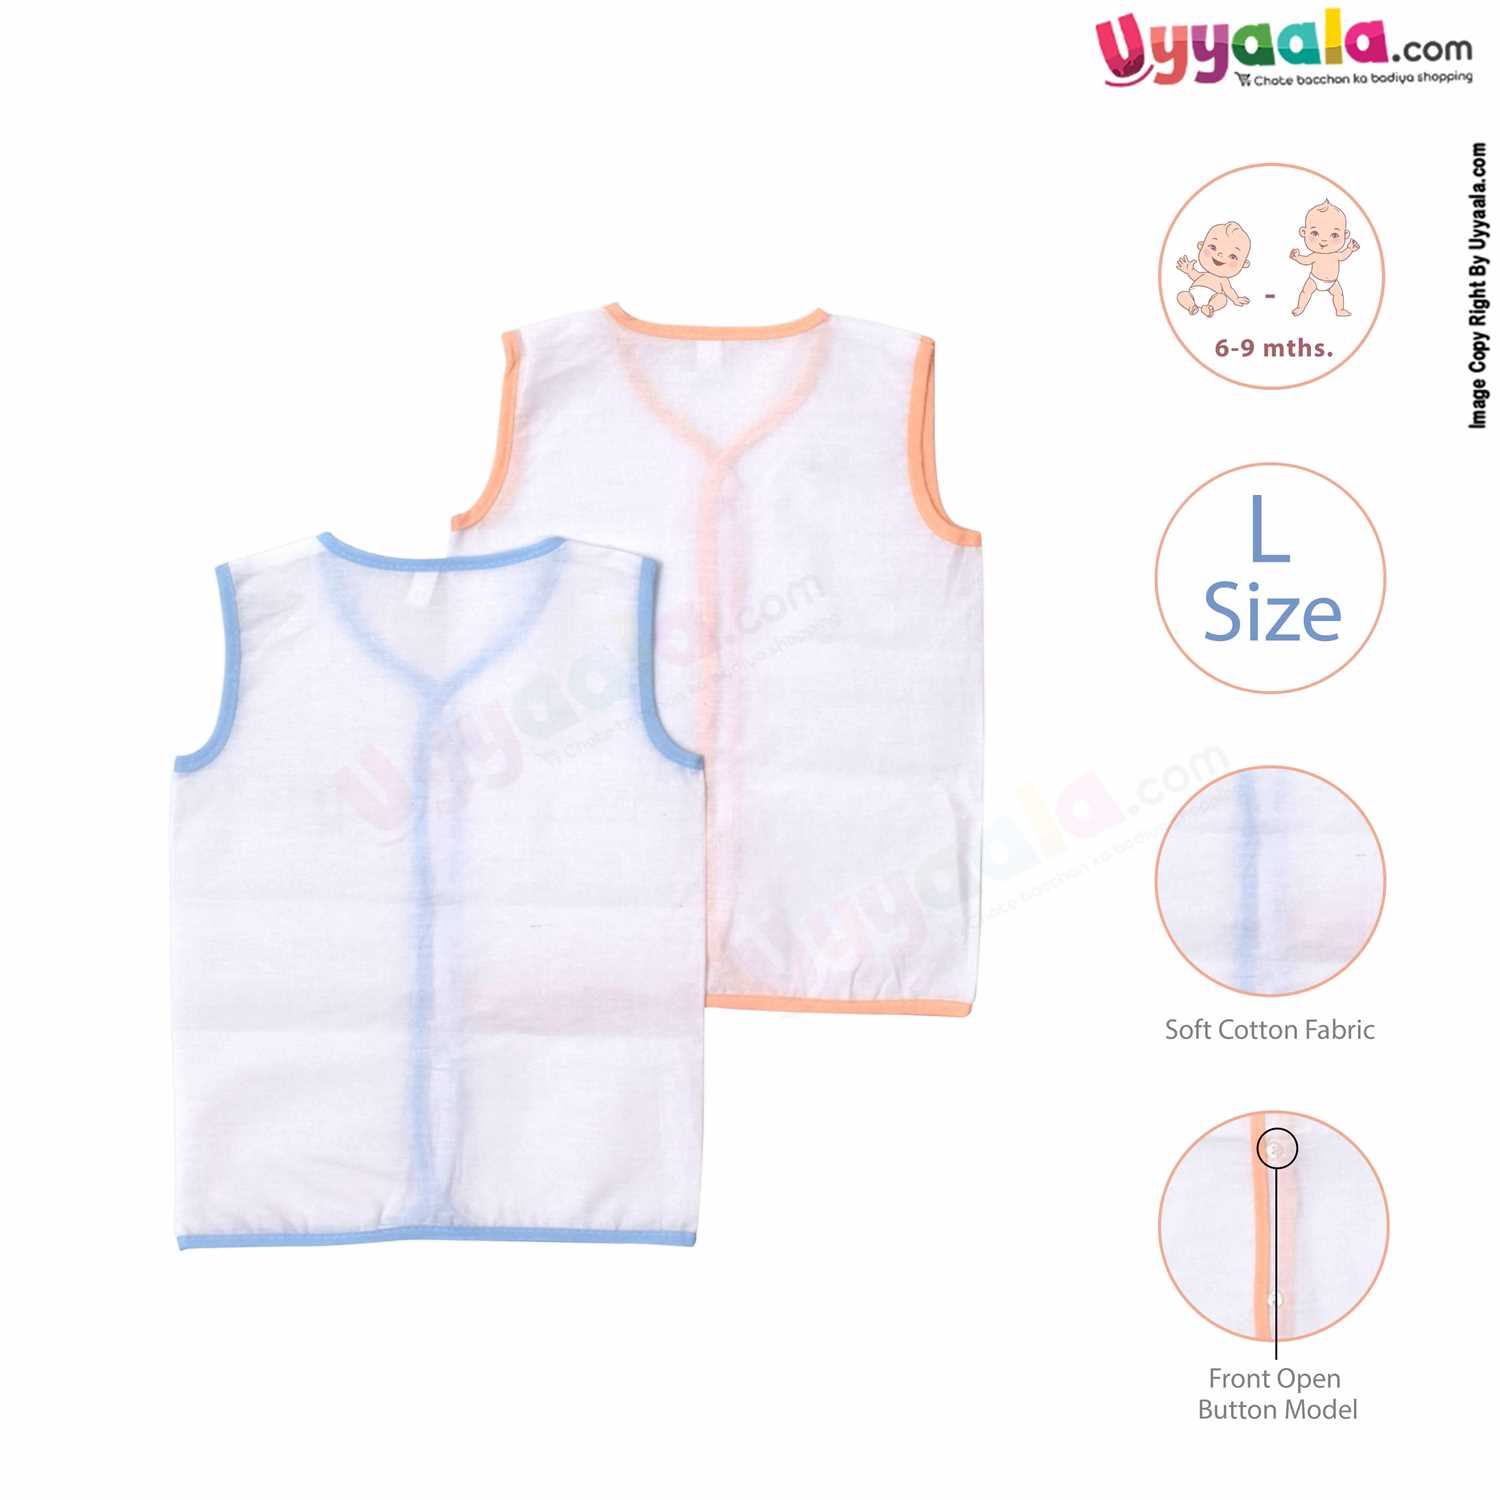 POLAR CUBS Sleeveless Baby Jabla Set, Front Opening Button Model, Premium Quality Cotton Baby Wear, (6-9M), 2Pack - White with Blue & Orange Borders